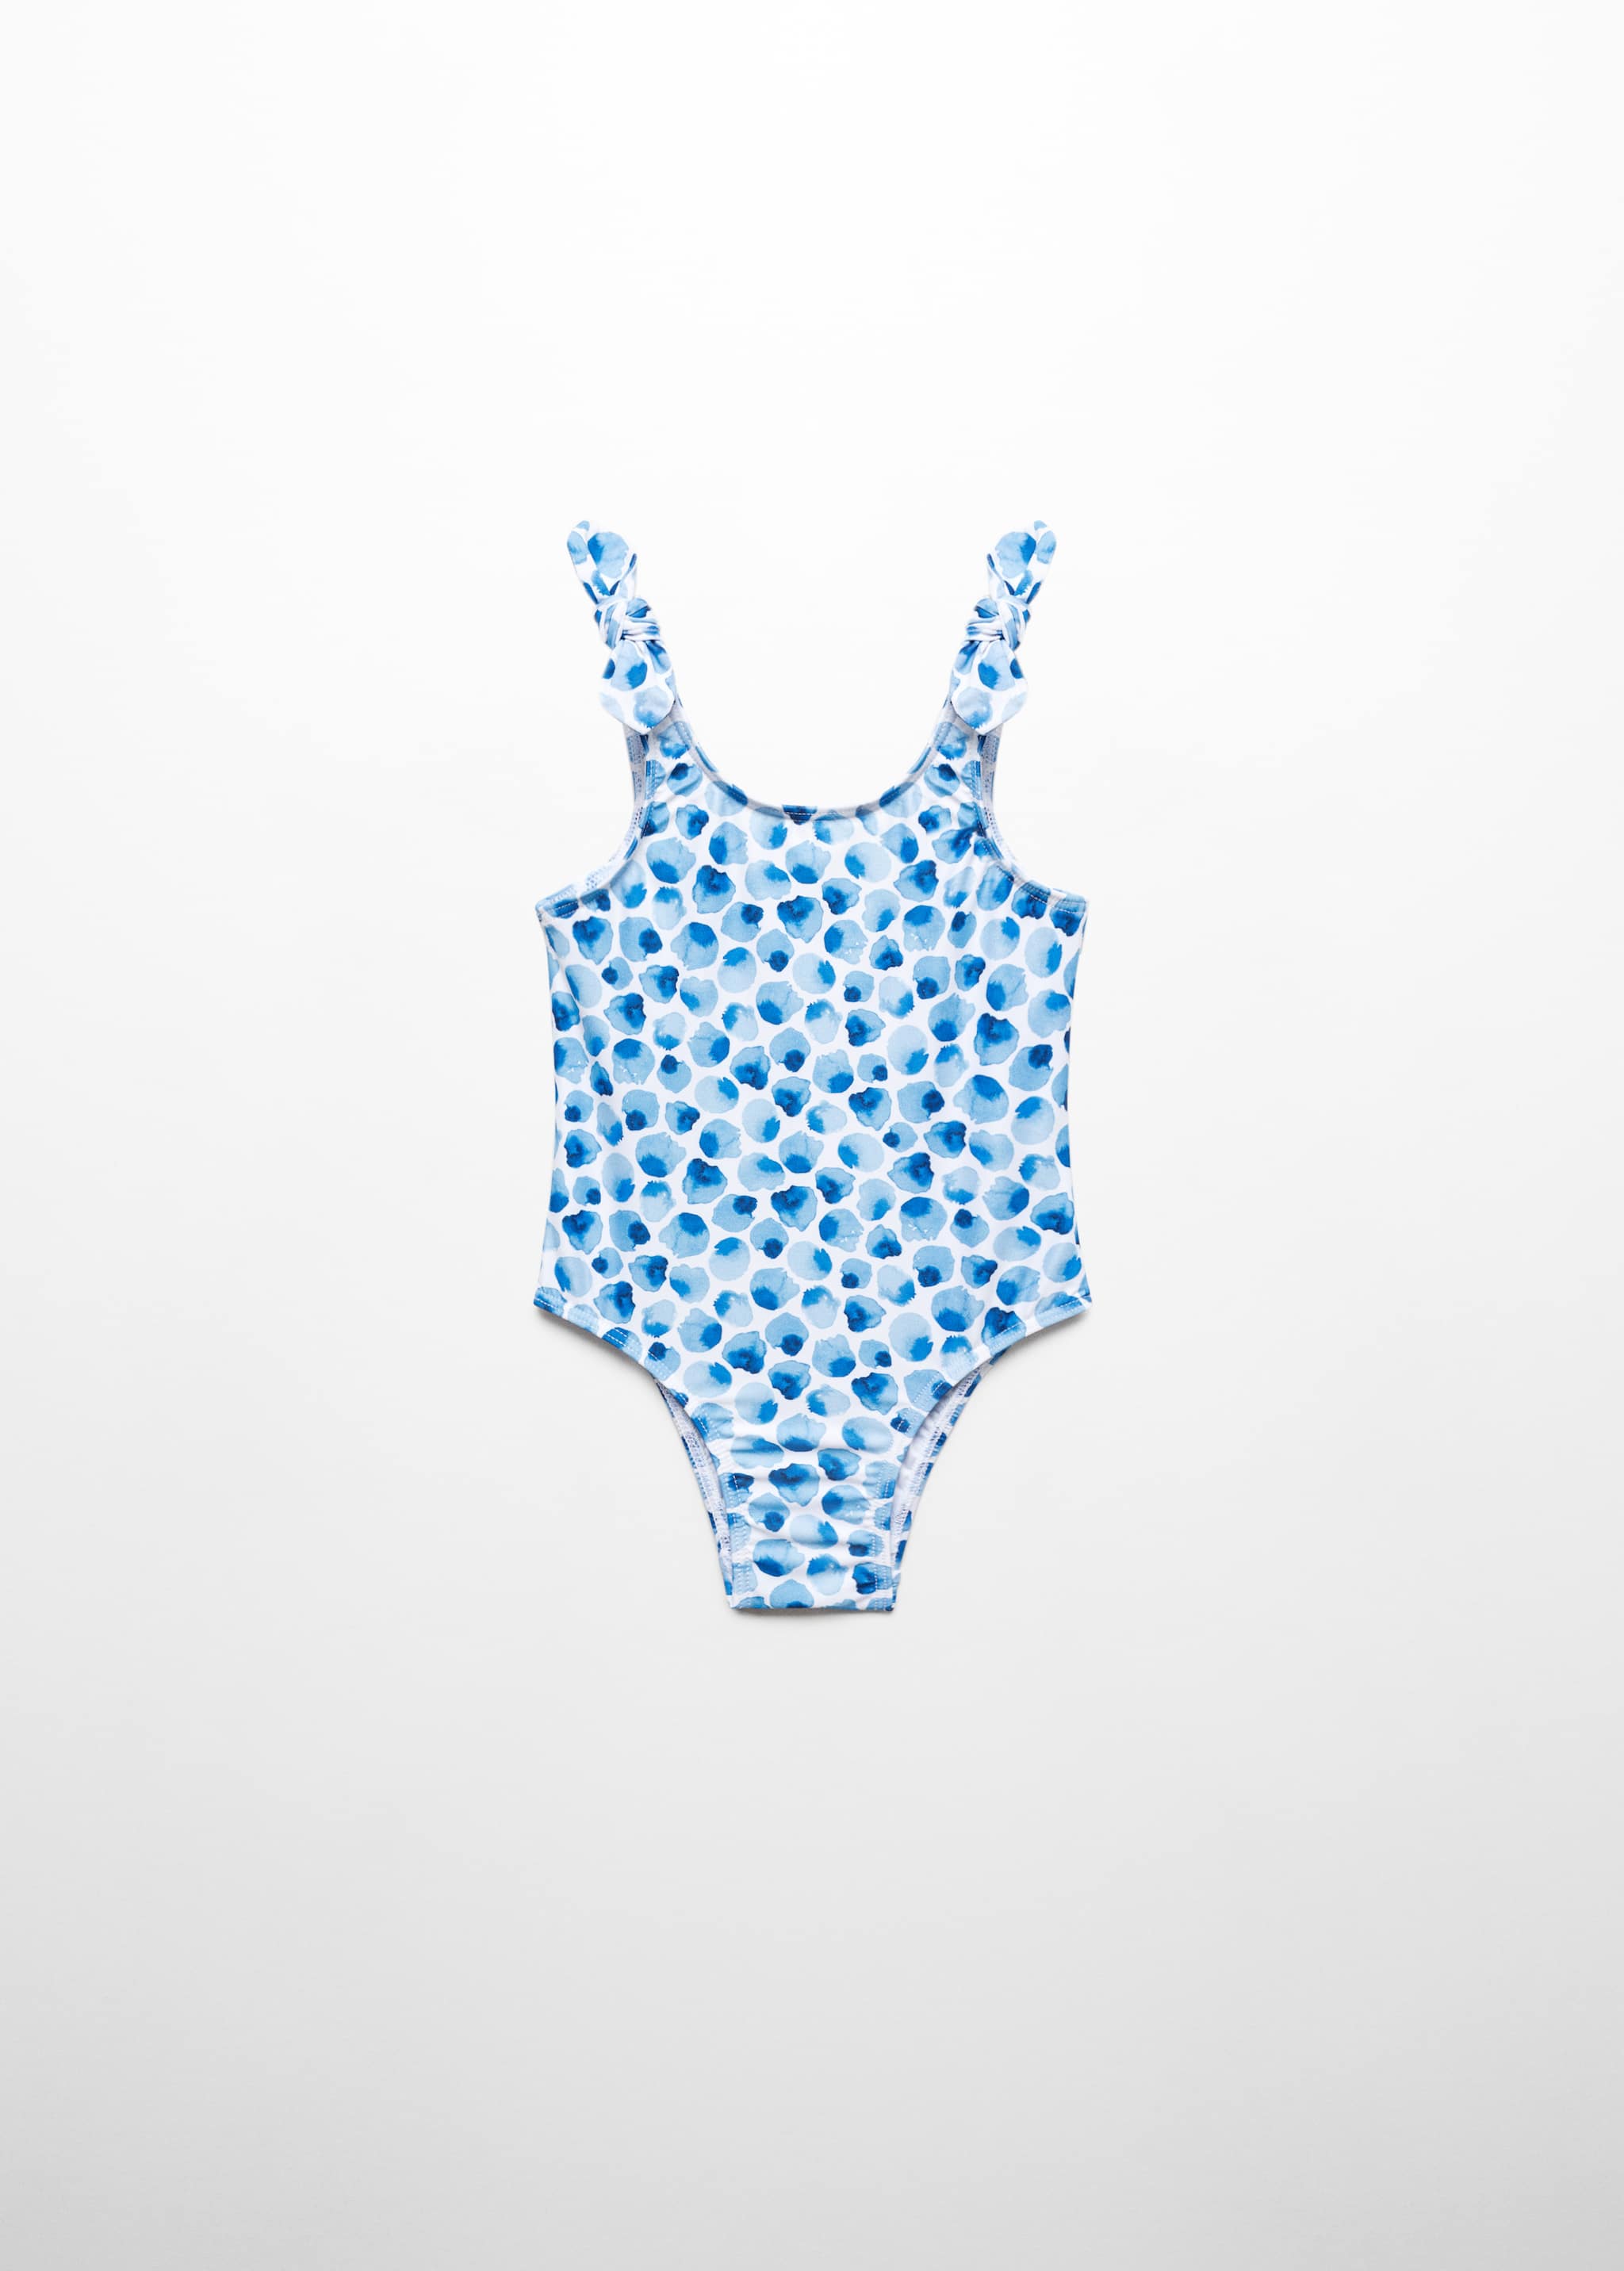 Printed swimsuit - Article without model